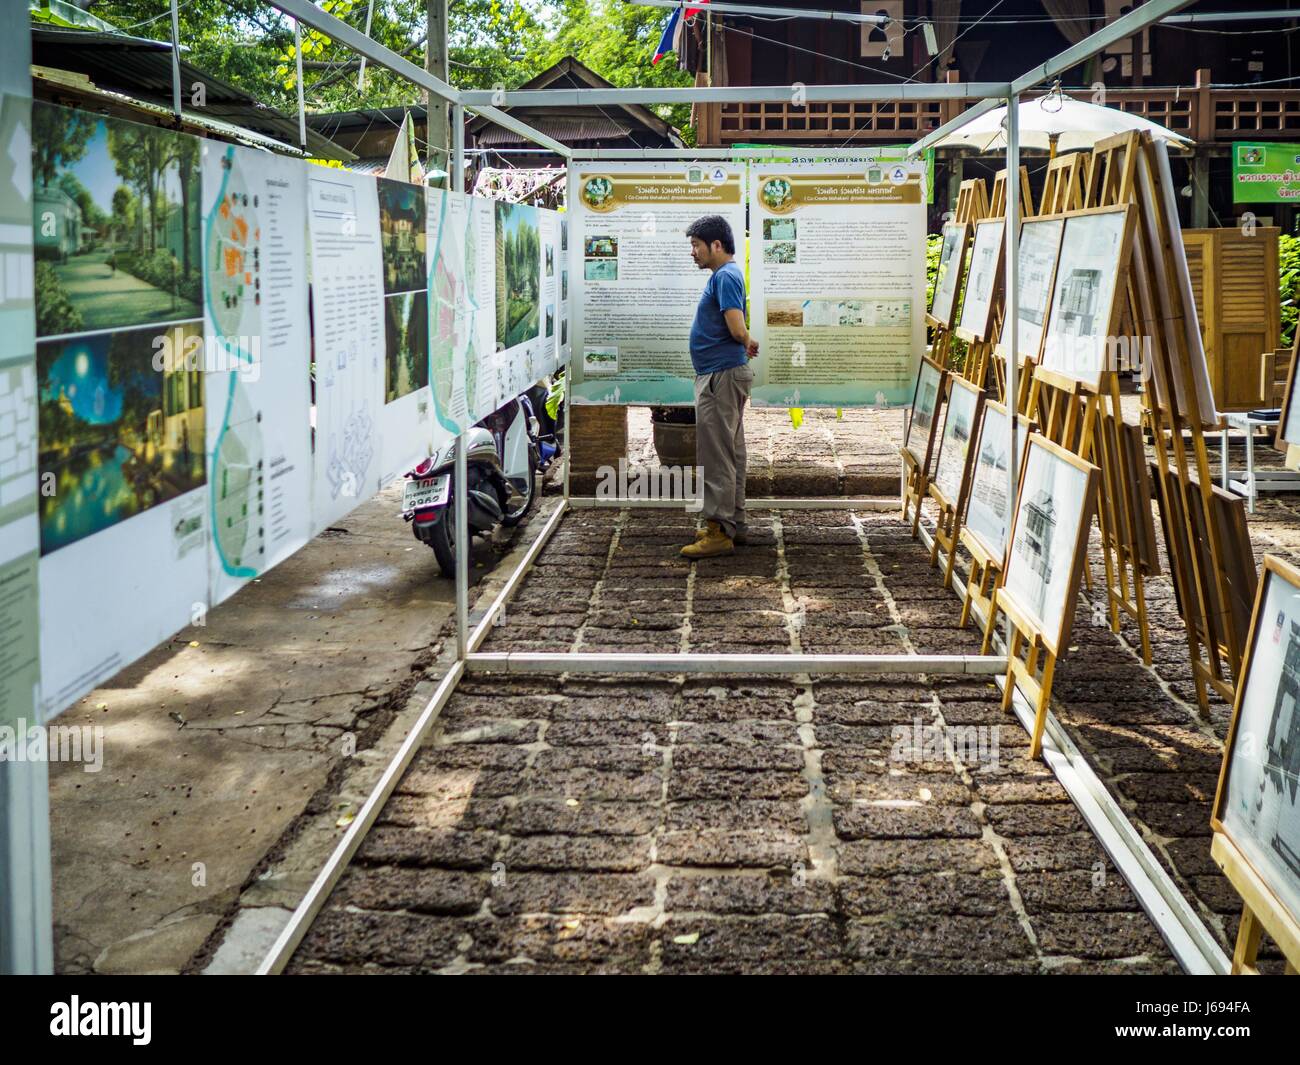 Bangkok, Bangkok, Thailand. 20th May, 2017. A Thai man looks at an exhibit about the historic roots of Pom Mahakan in a community square in Pom Mahakan. The final evictions of the remaining families in Pom Mahakan, a slum community in a 19th century fort in Bangkok, have started. City officials are moving the residents out of the fort. NGOs and historic preservation organizations protested the city's action but city officials did not relent and started evicting the remaining families in early March. Credit: Jack Kurtz/ZUMA Wire/Alamy Live News Stock Photo